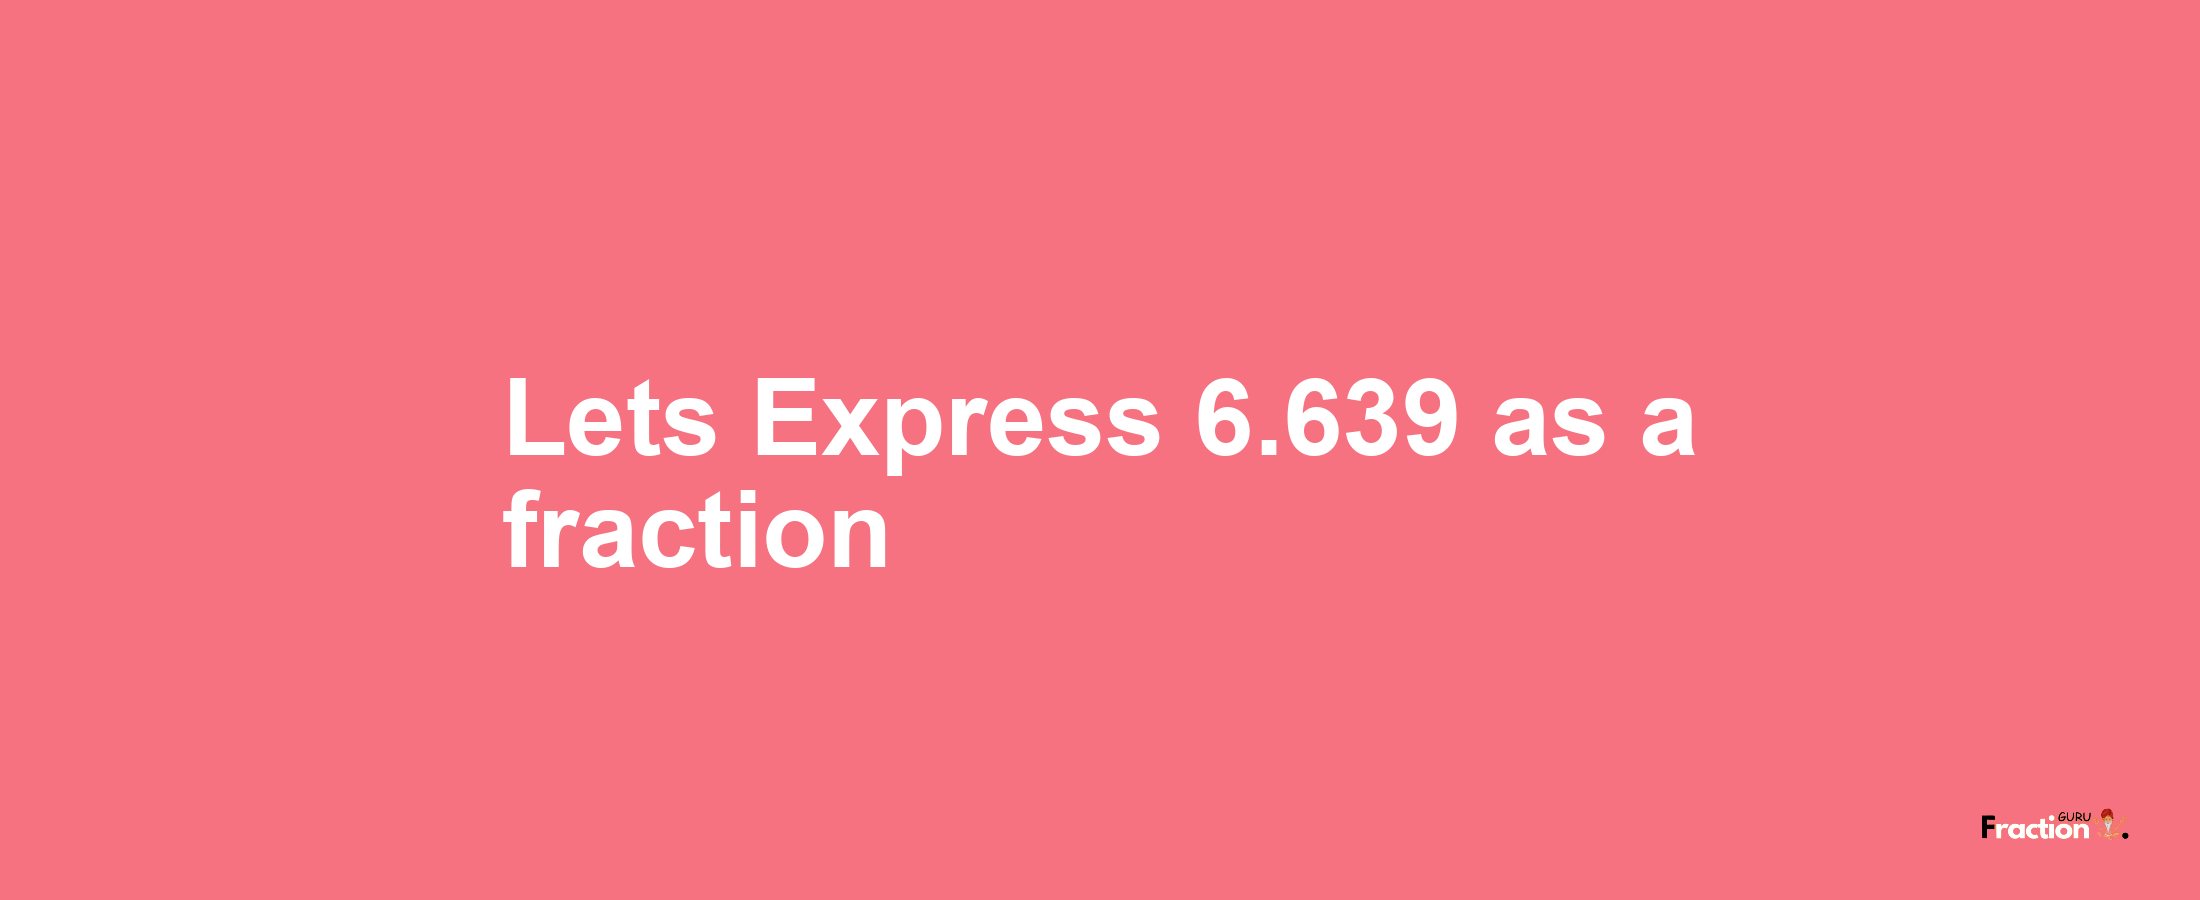 Lets Express 6.639 as afraction